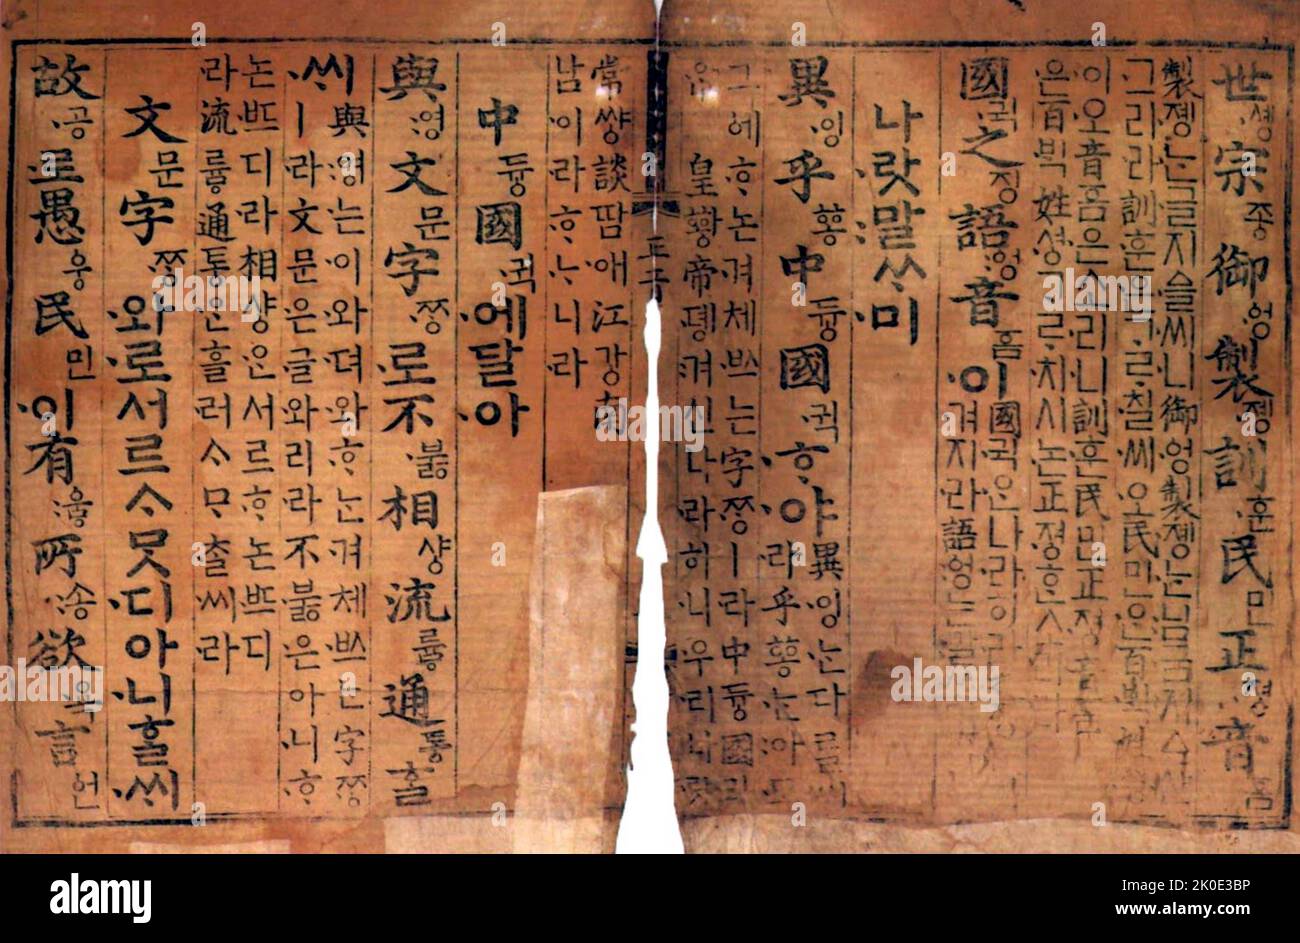 Hunminjeongeum (The Correct/Proper Sounds for the Instruction of the People) is a document describing an entirely new and native script for the Korean language. It was created so that the common people illiterate in hanja could accurately and easily read and write the Korean language. Stock Photo